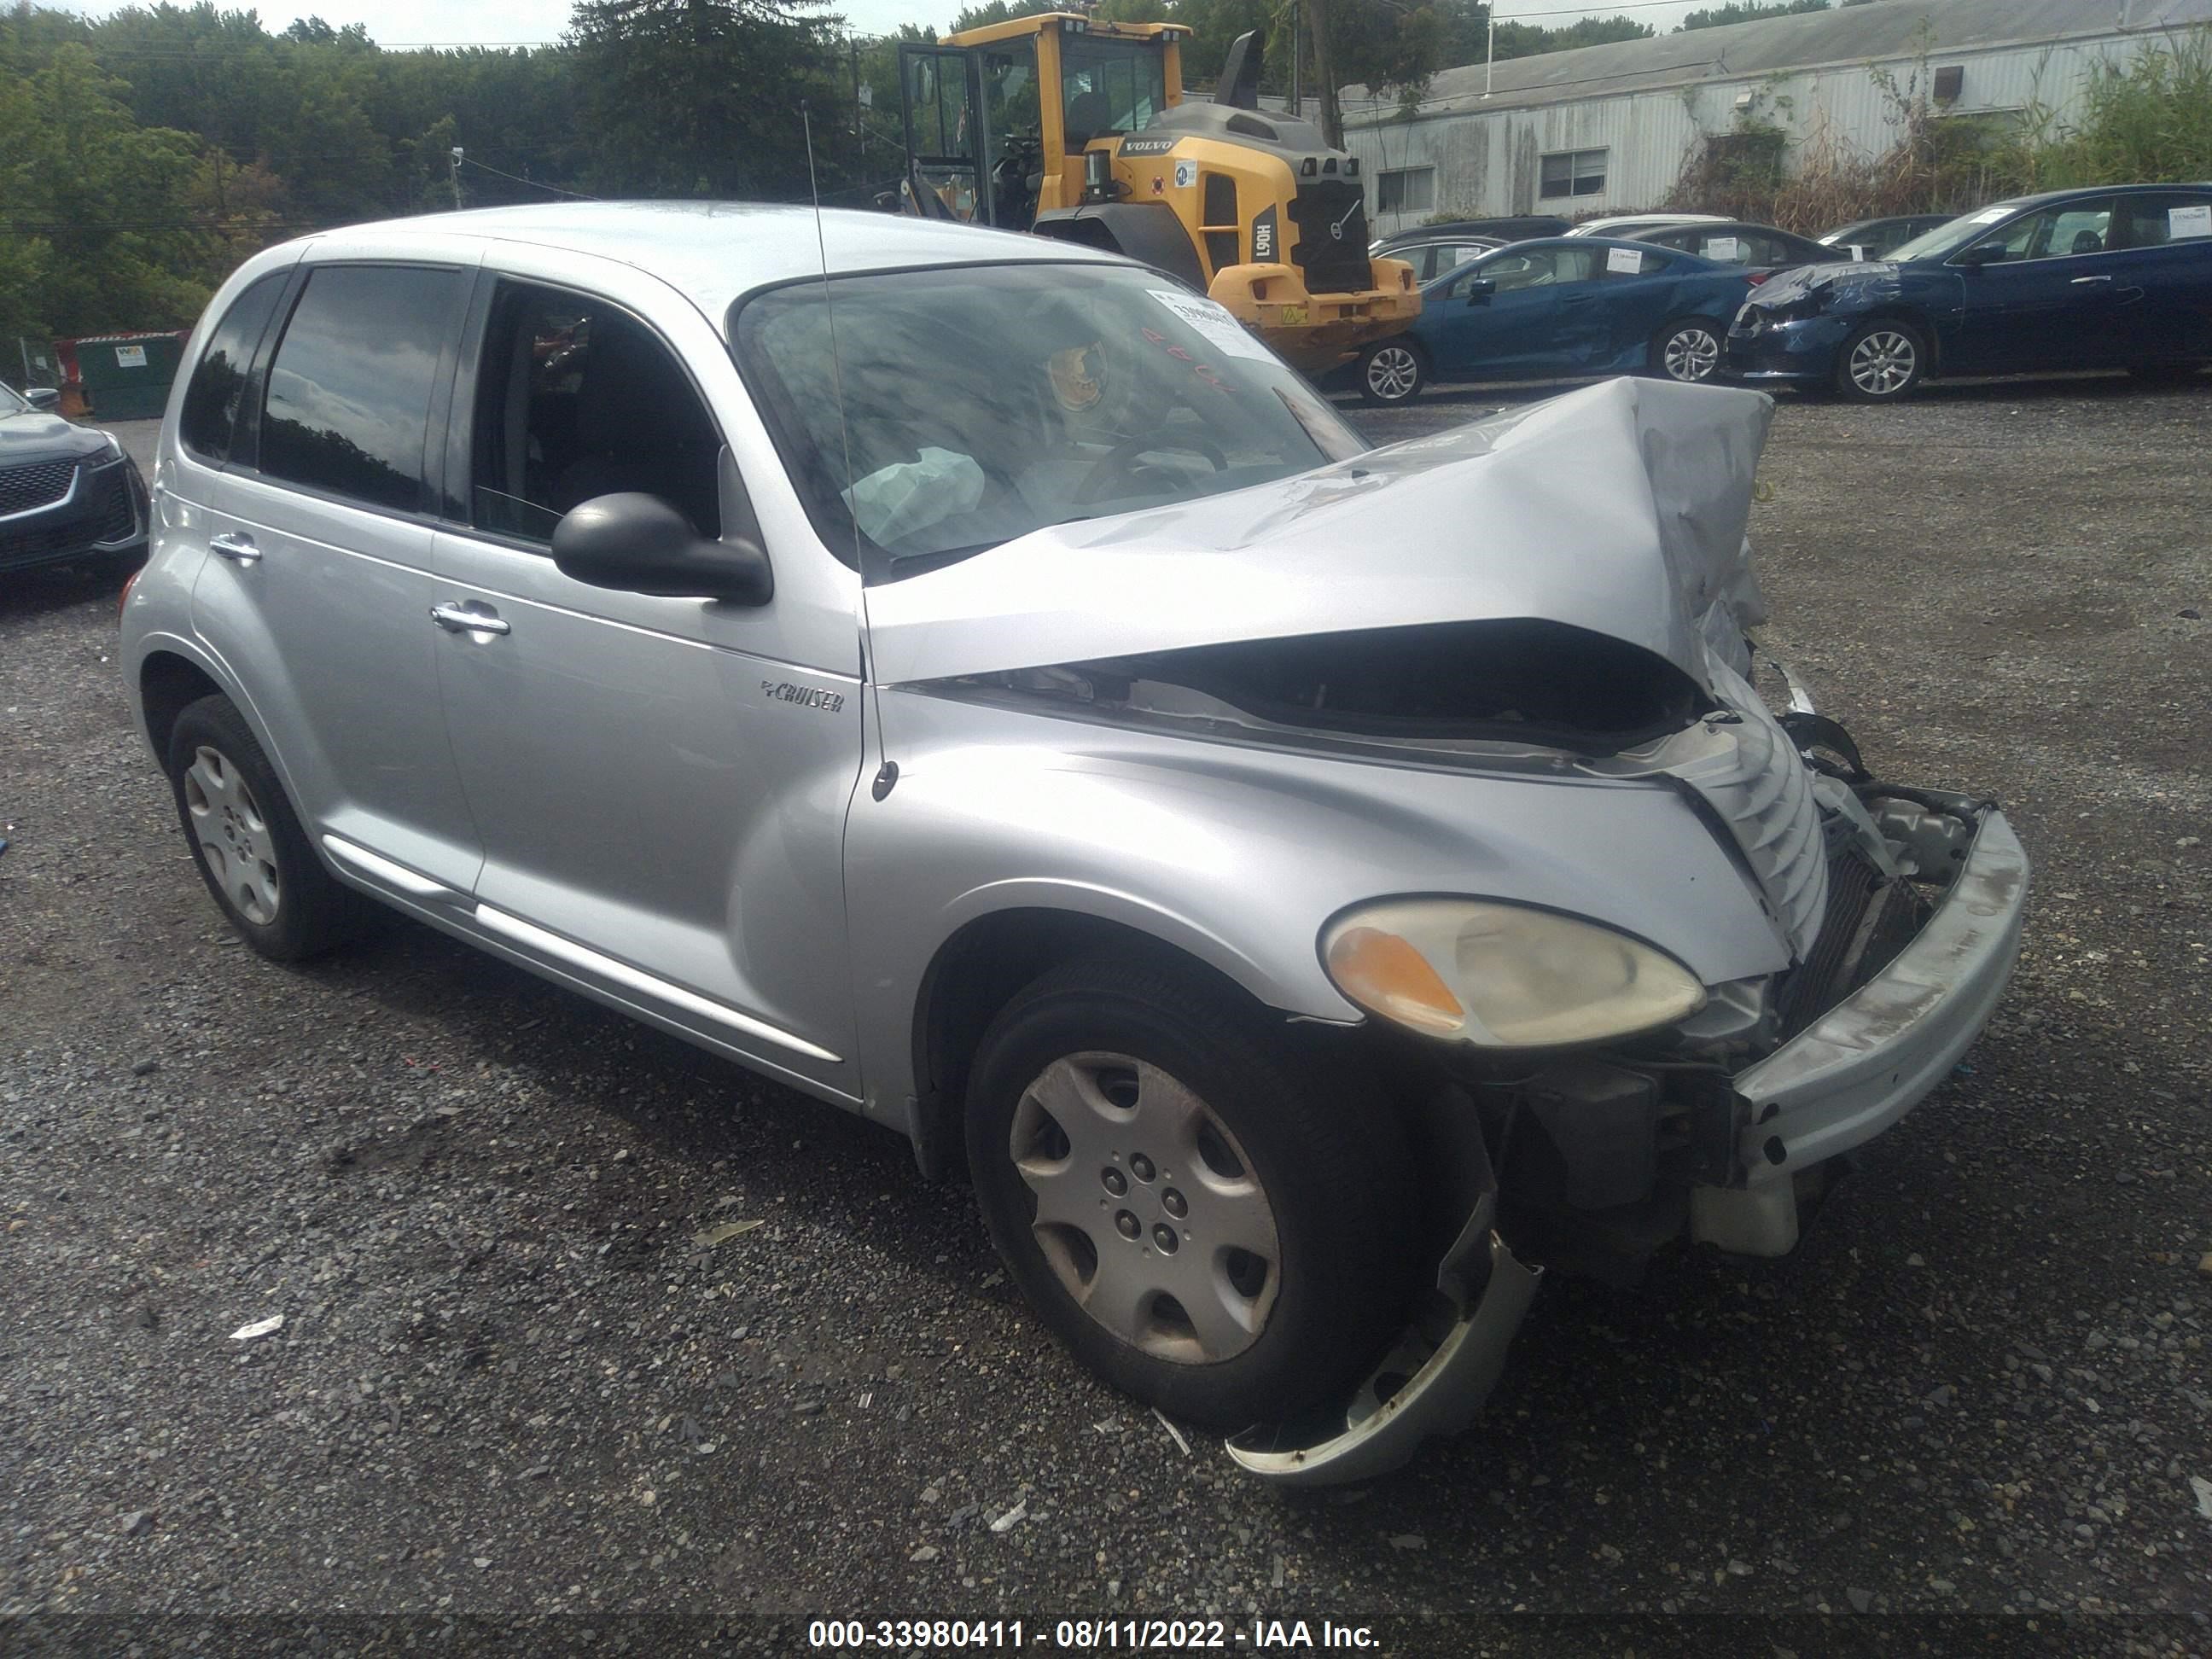 vin: 3C4FY48B54T313375 3C4FY48B54T313375 2004 chrysler pt cruiser 2400 for Sale in 19720, 417 Old Airport Road, New Castle, Delaware, USA